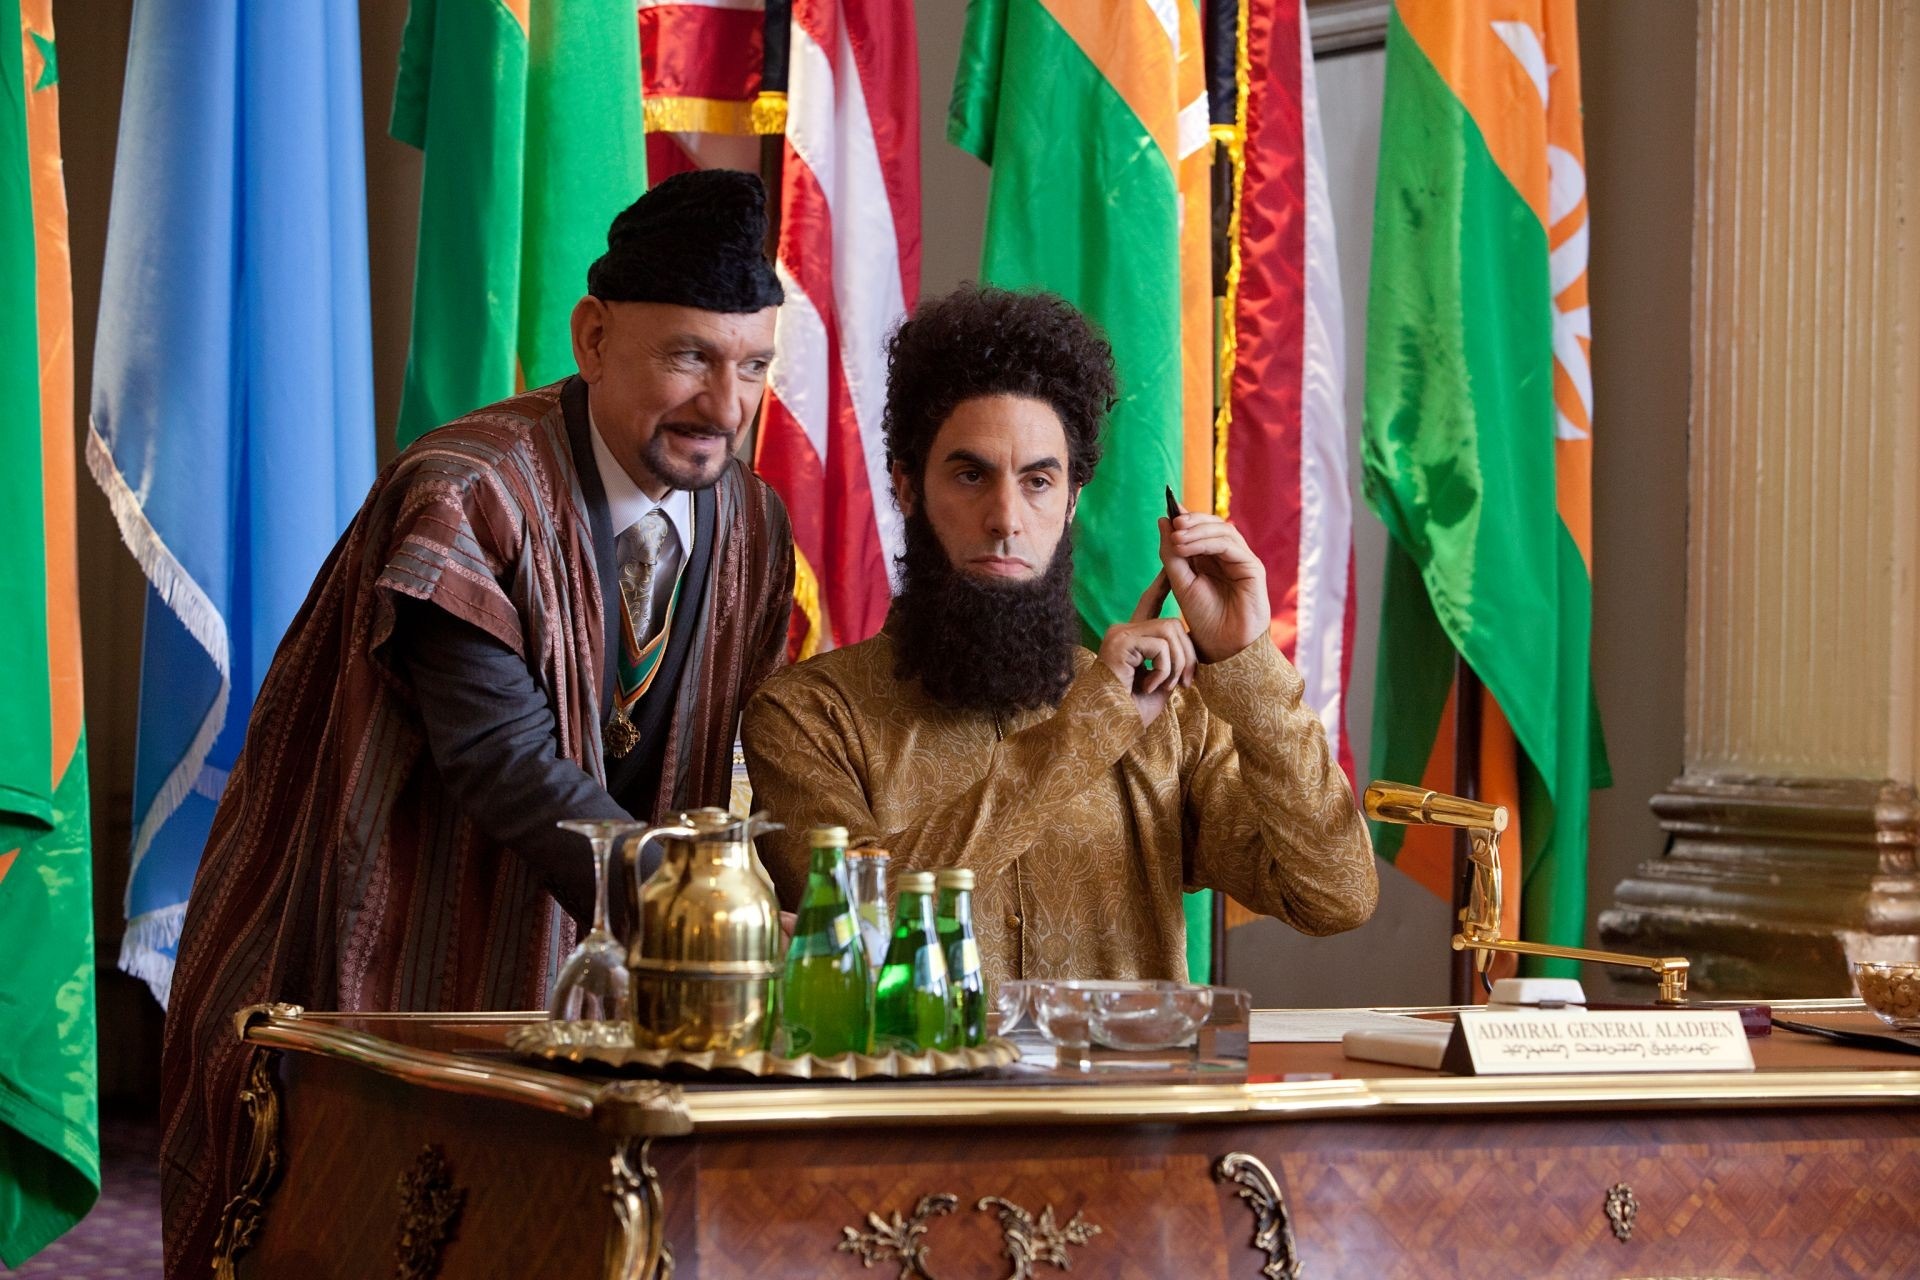 Ben Kingsley stars as Tamir and Sacha Baron Cohen stars as General Aladeen in Paramount Pictures' The Dictator (2012). Photo credit by Melinda Sue Gordon.